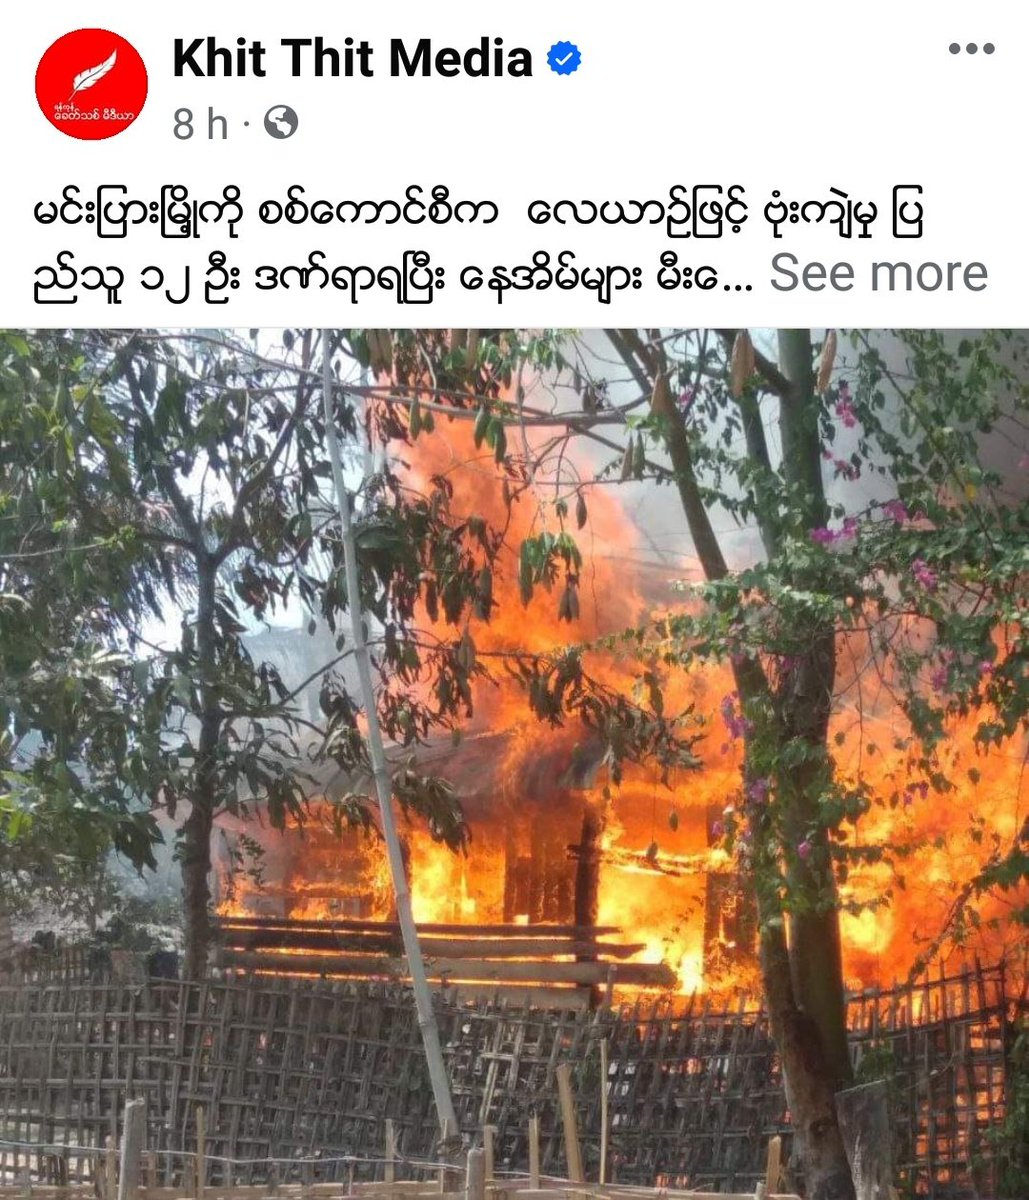 According to local residents, 12 innocent civilians were seriously injured & 5 houses were destroyed due to the terrorist military council's aerial bombardment of MinBya town in Rakhine state on April30.
@UN @ASEAN @EUCouncil
@POTUS
#BanJetFuelExportsToMM
#WhatsHappeningInMyanmar